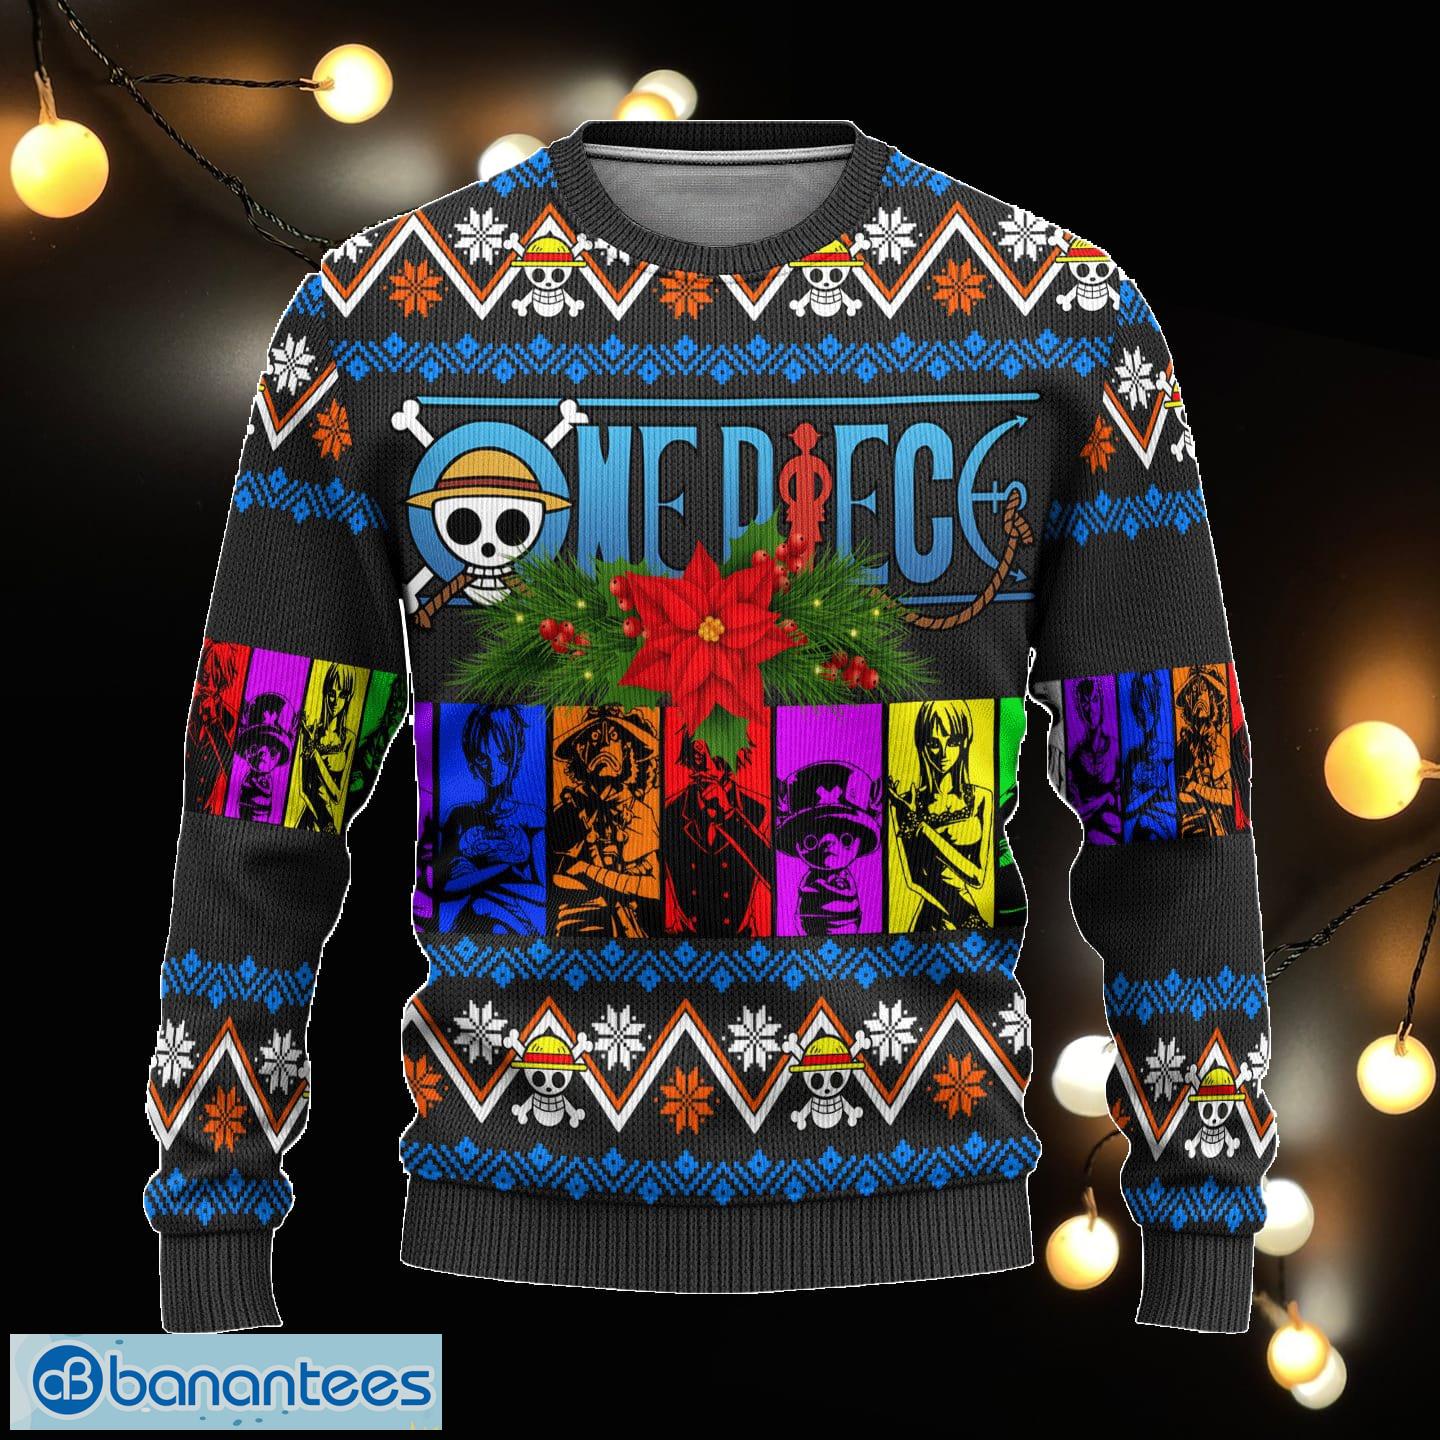 One Piece Anime Charaters Xmas Ugly Christmas Sweater Gift For Men Women - One Piece Anime Ugly Christmas Sweater Charaters Xmas Gift_1